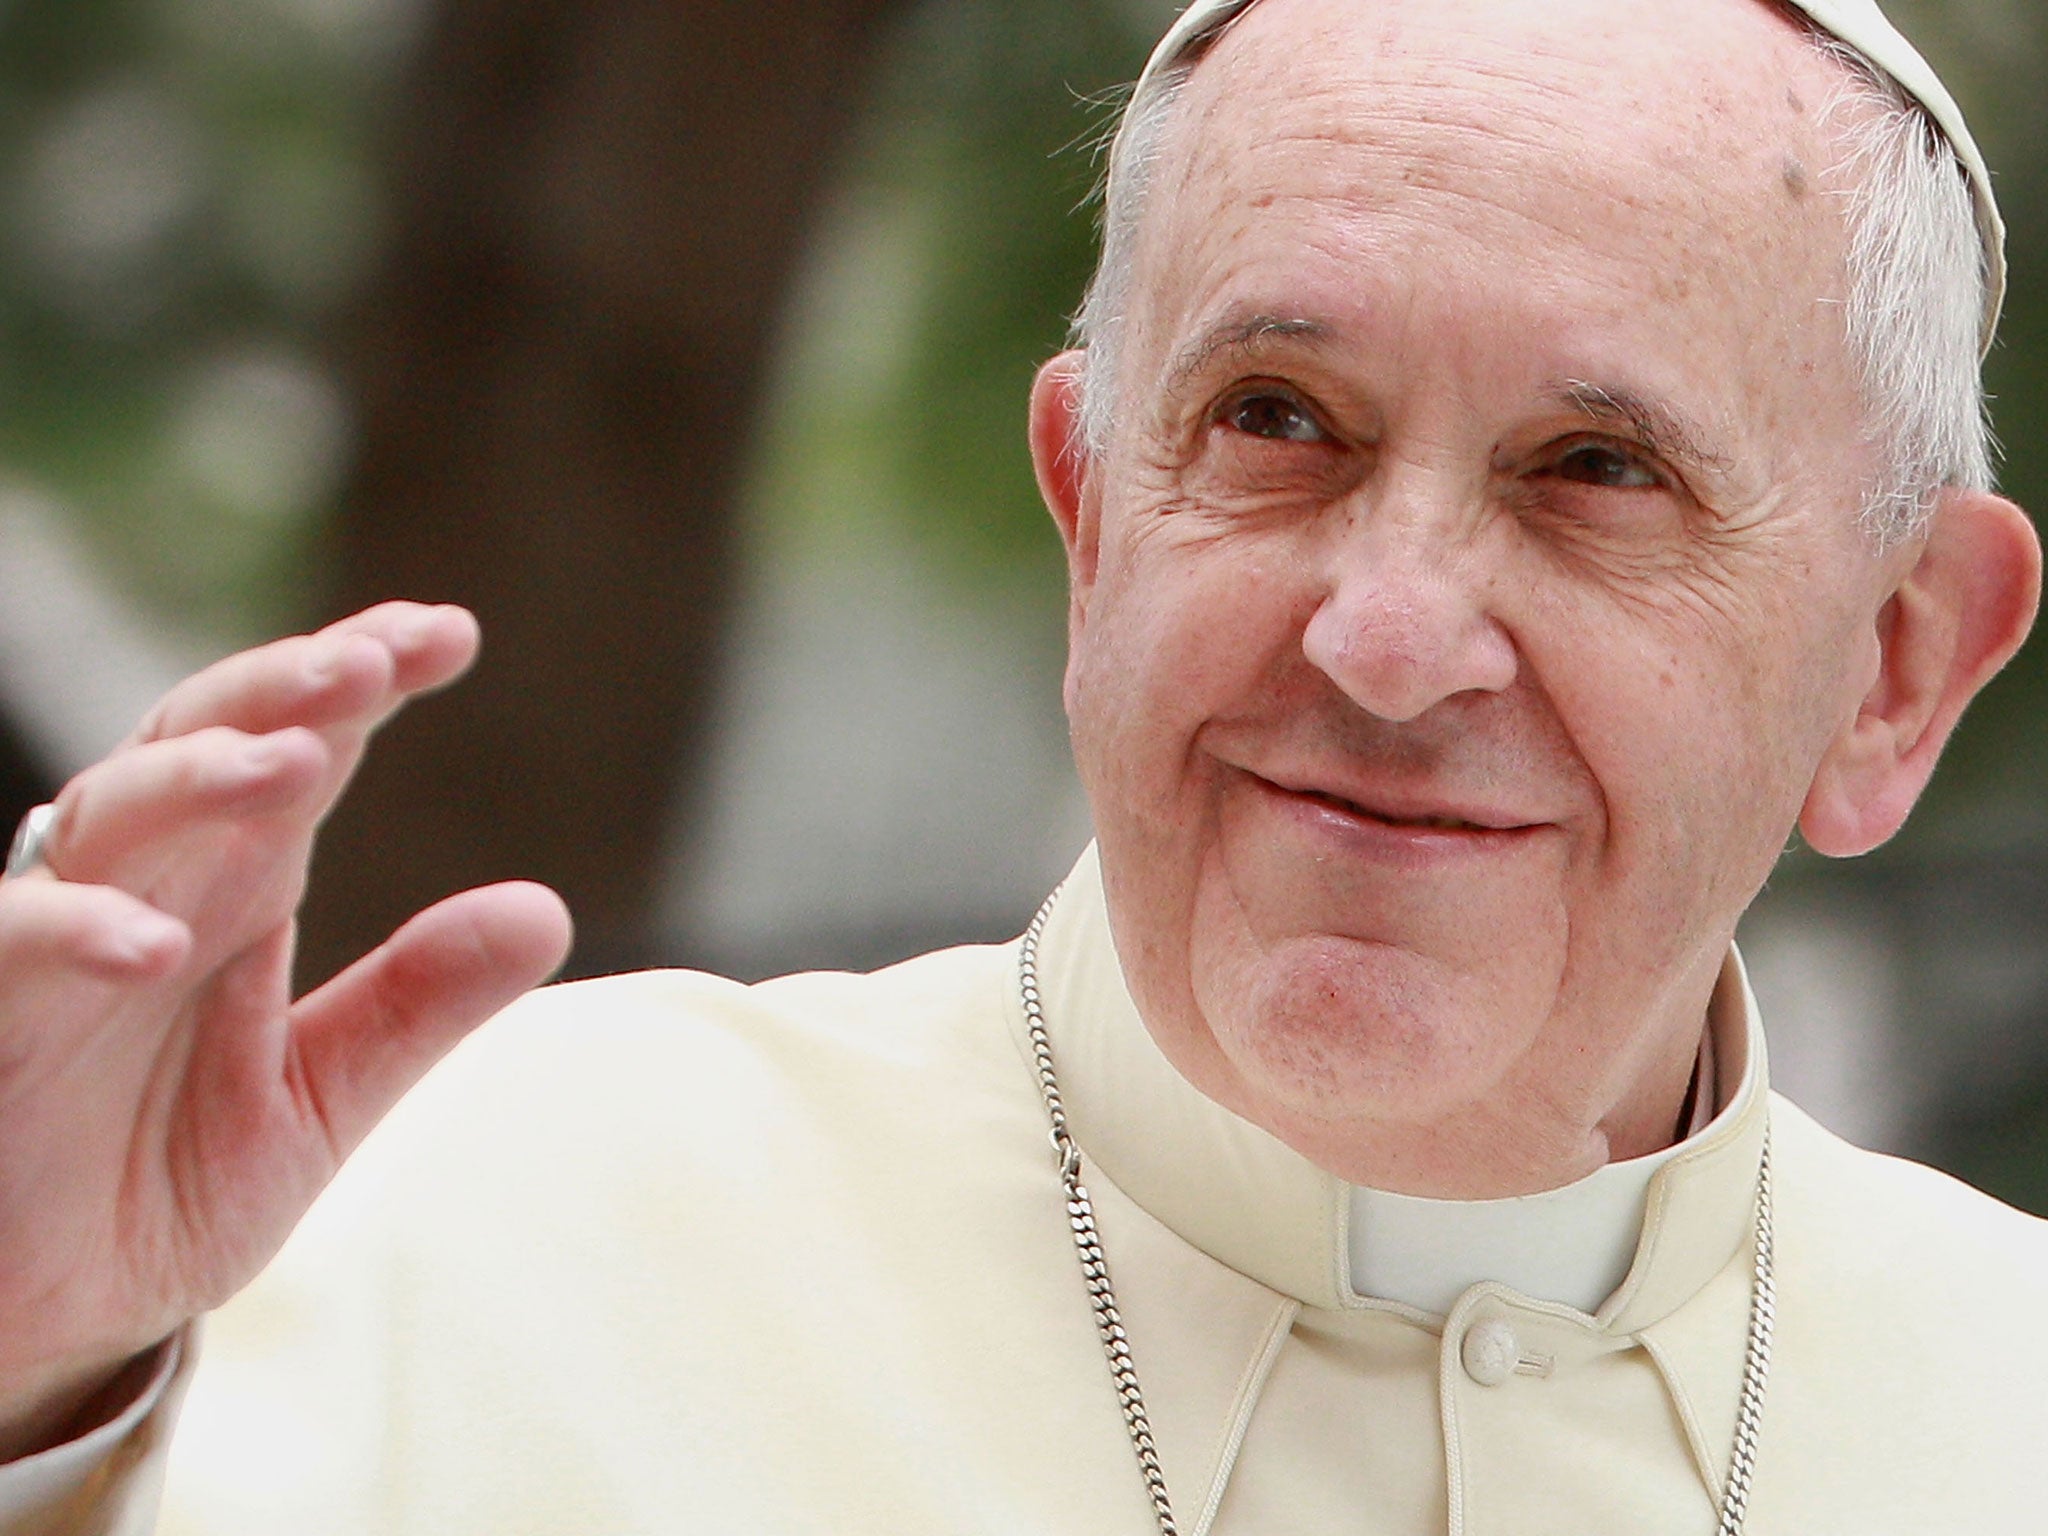 Pope Francis has built showers for homeless people